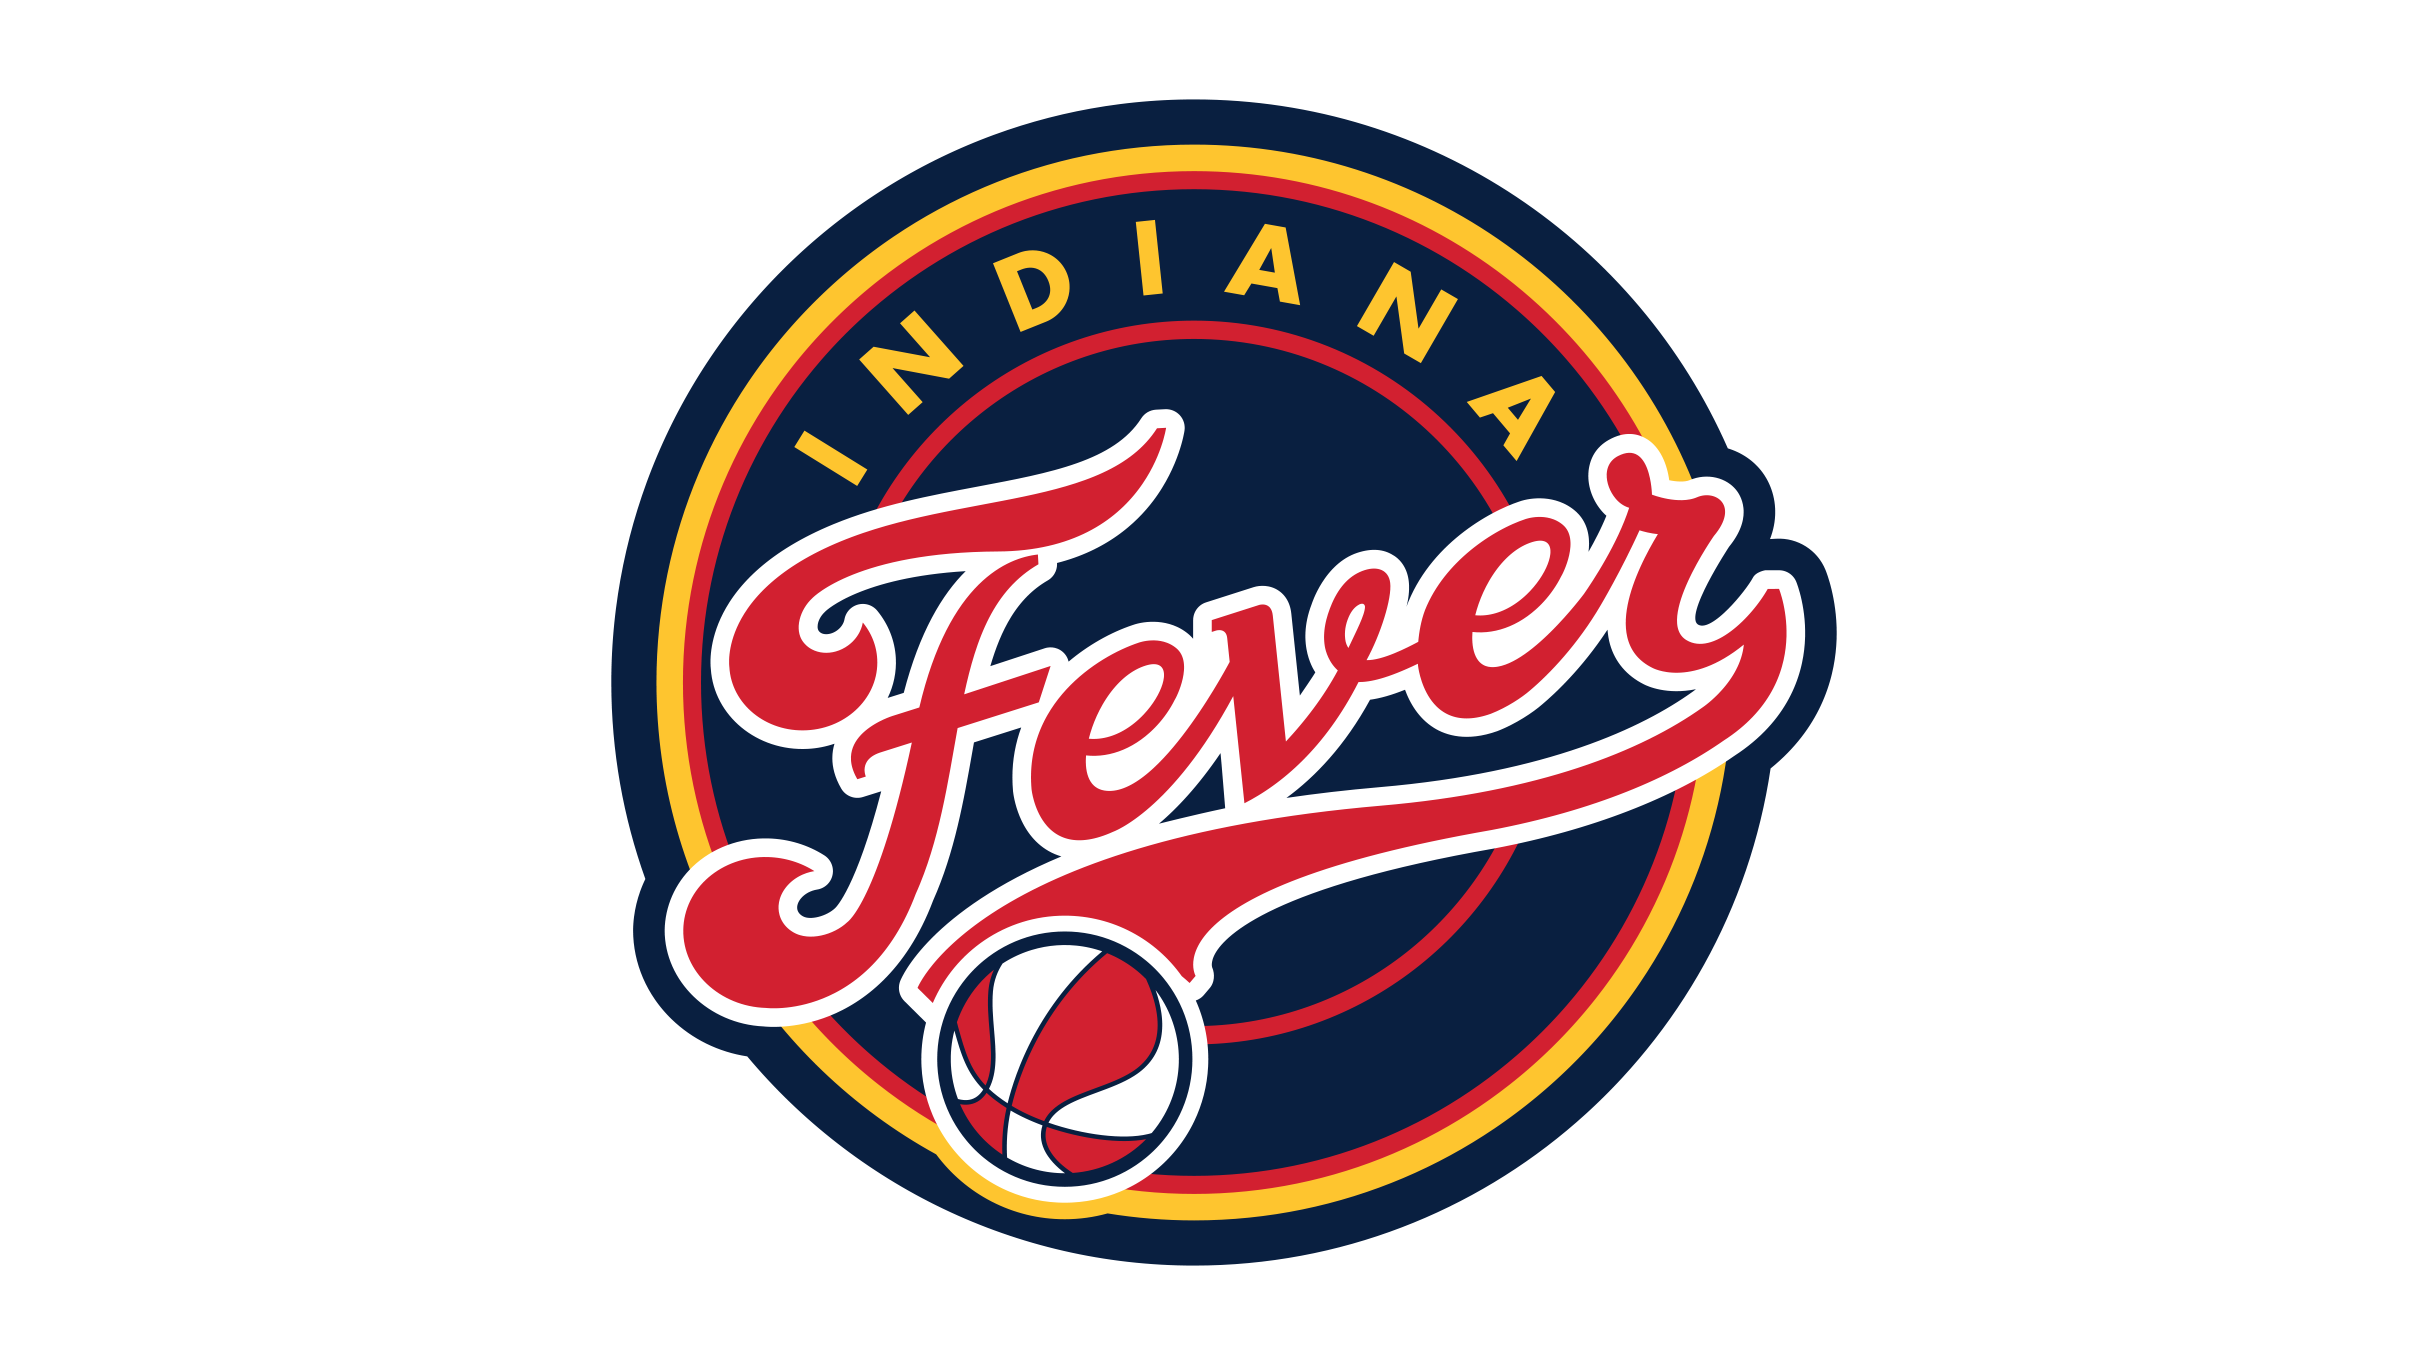 Indiana Fever vs. Seattle Storm